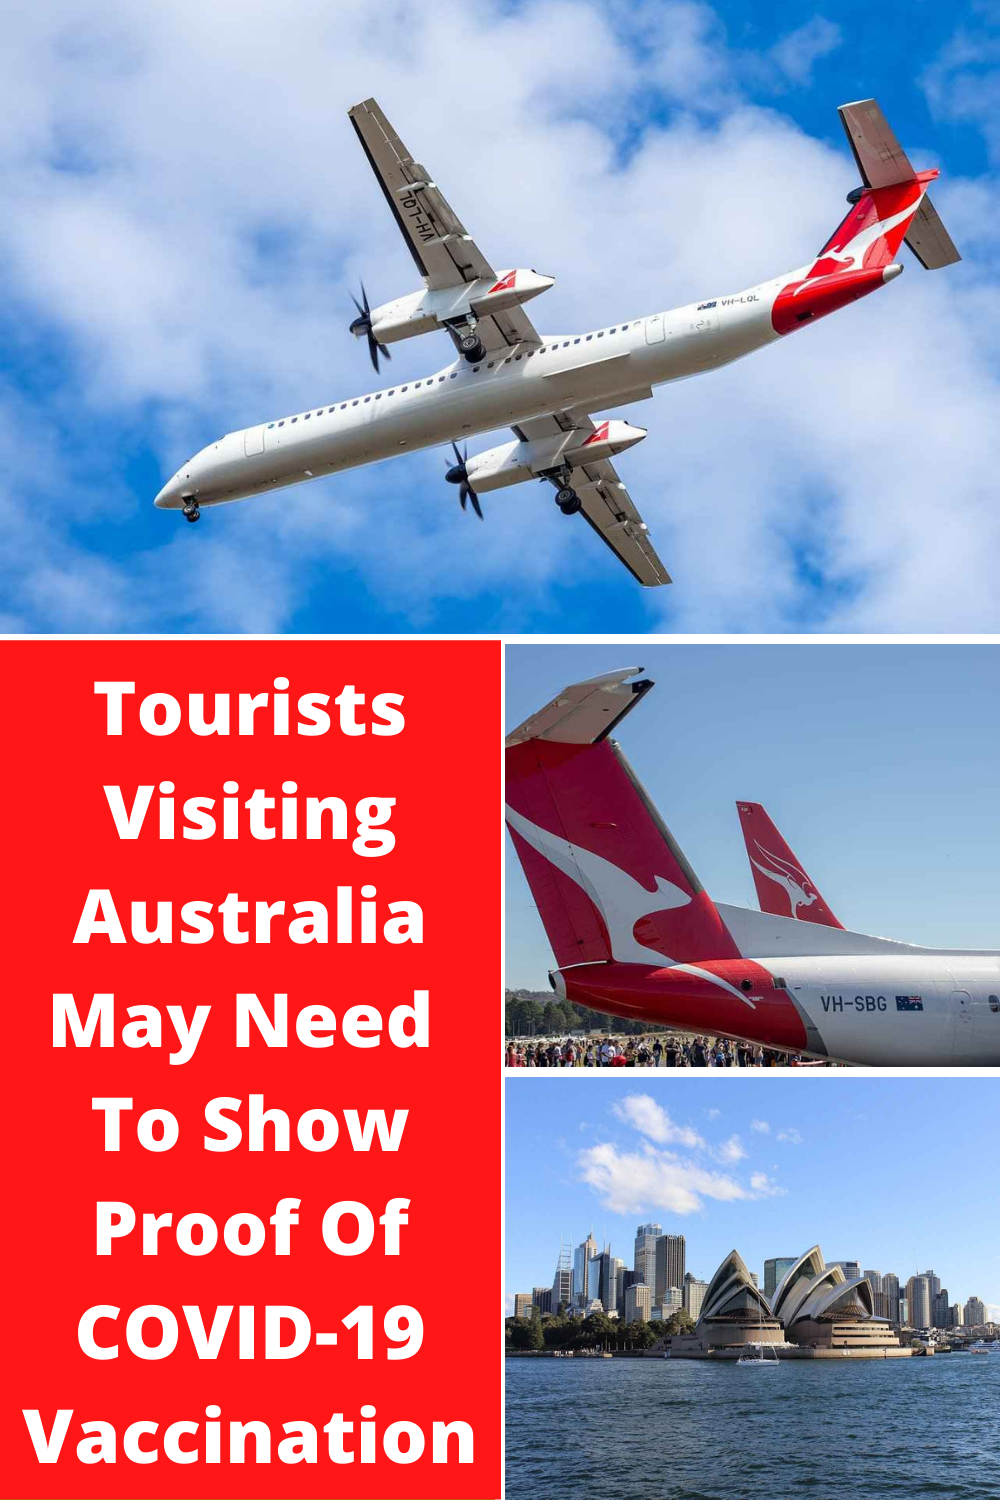 Tourists Visiting Australia May Need To Show Proof Of COVID-19 Vaccination